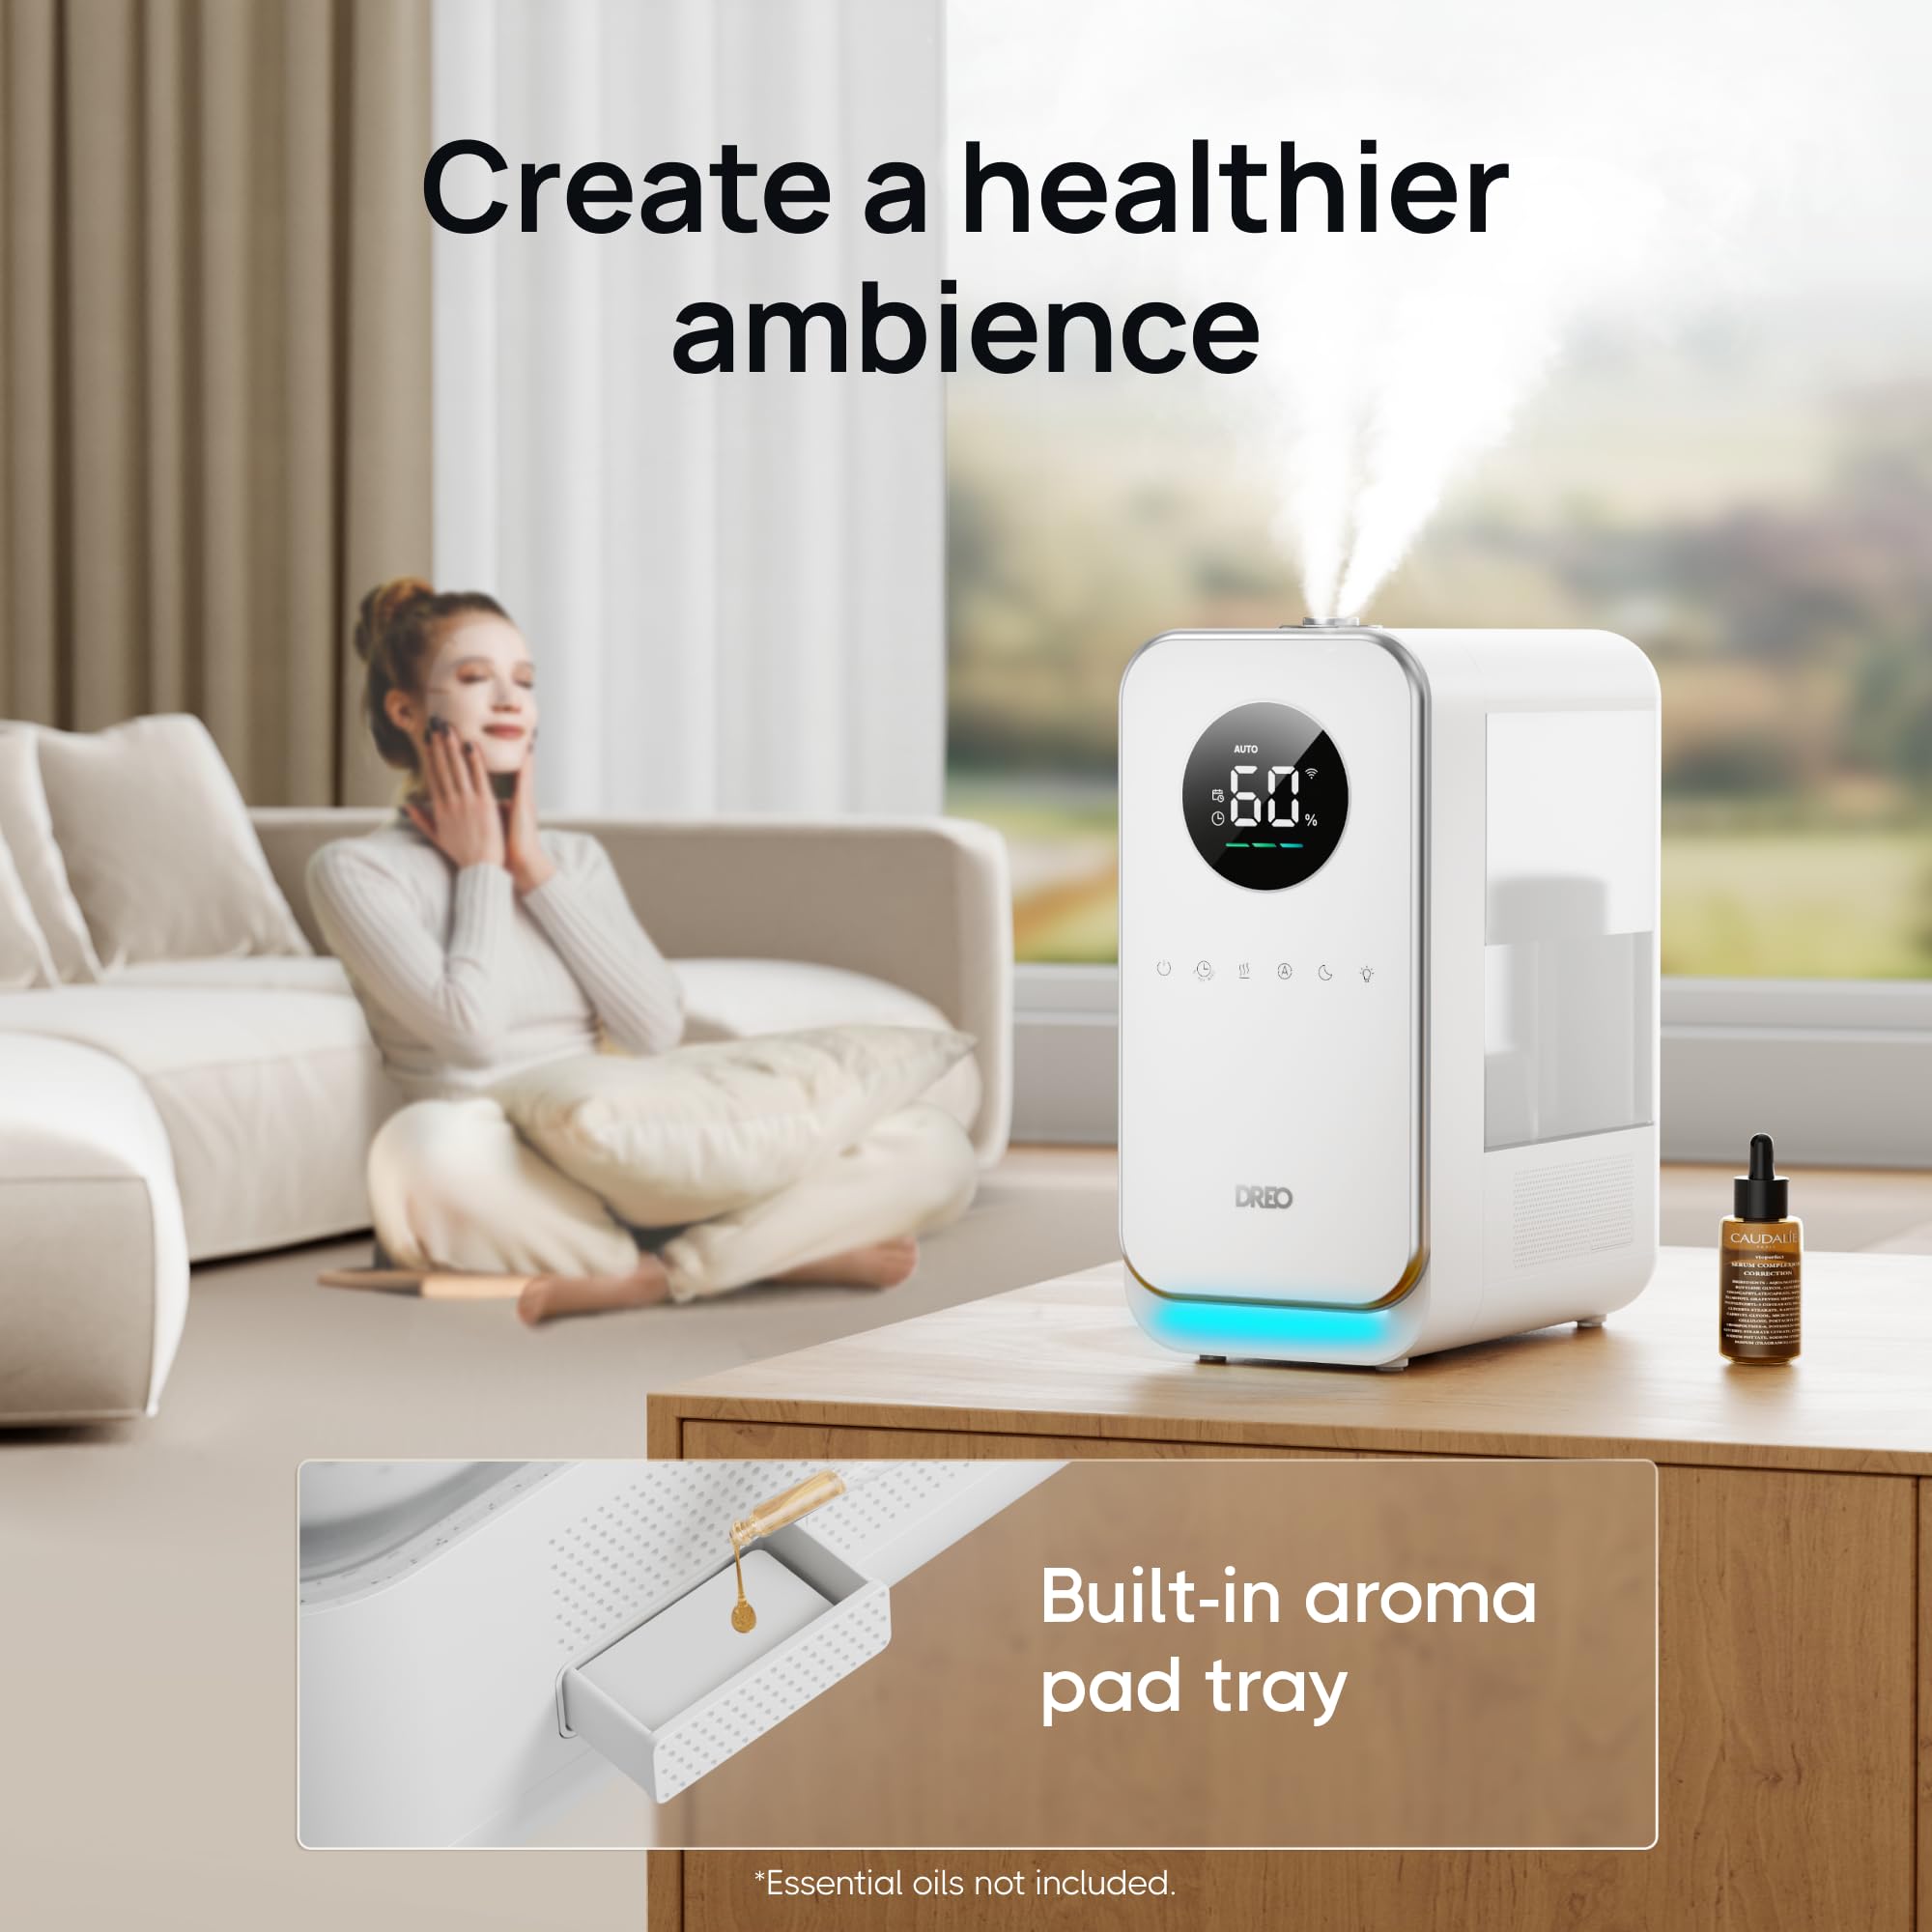 Dreo Humidifiers for Bedroom Home, Top-filled 5L Smart Quiet Cool Mist Humidifiers for Large Room, Oil Diffuser & Nightlight for Baby Nusery, 50Hours Runtime for Home, Indoor Plants, Alexa/Google